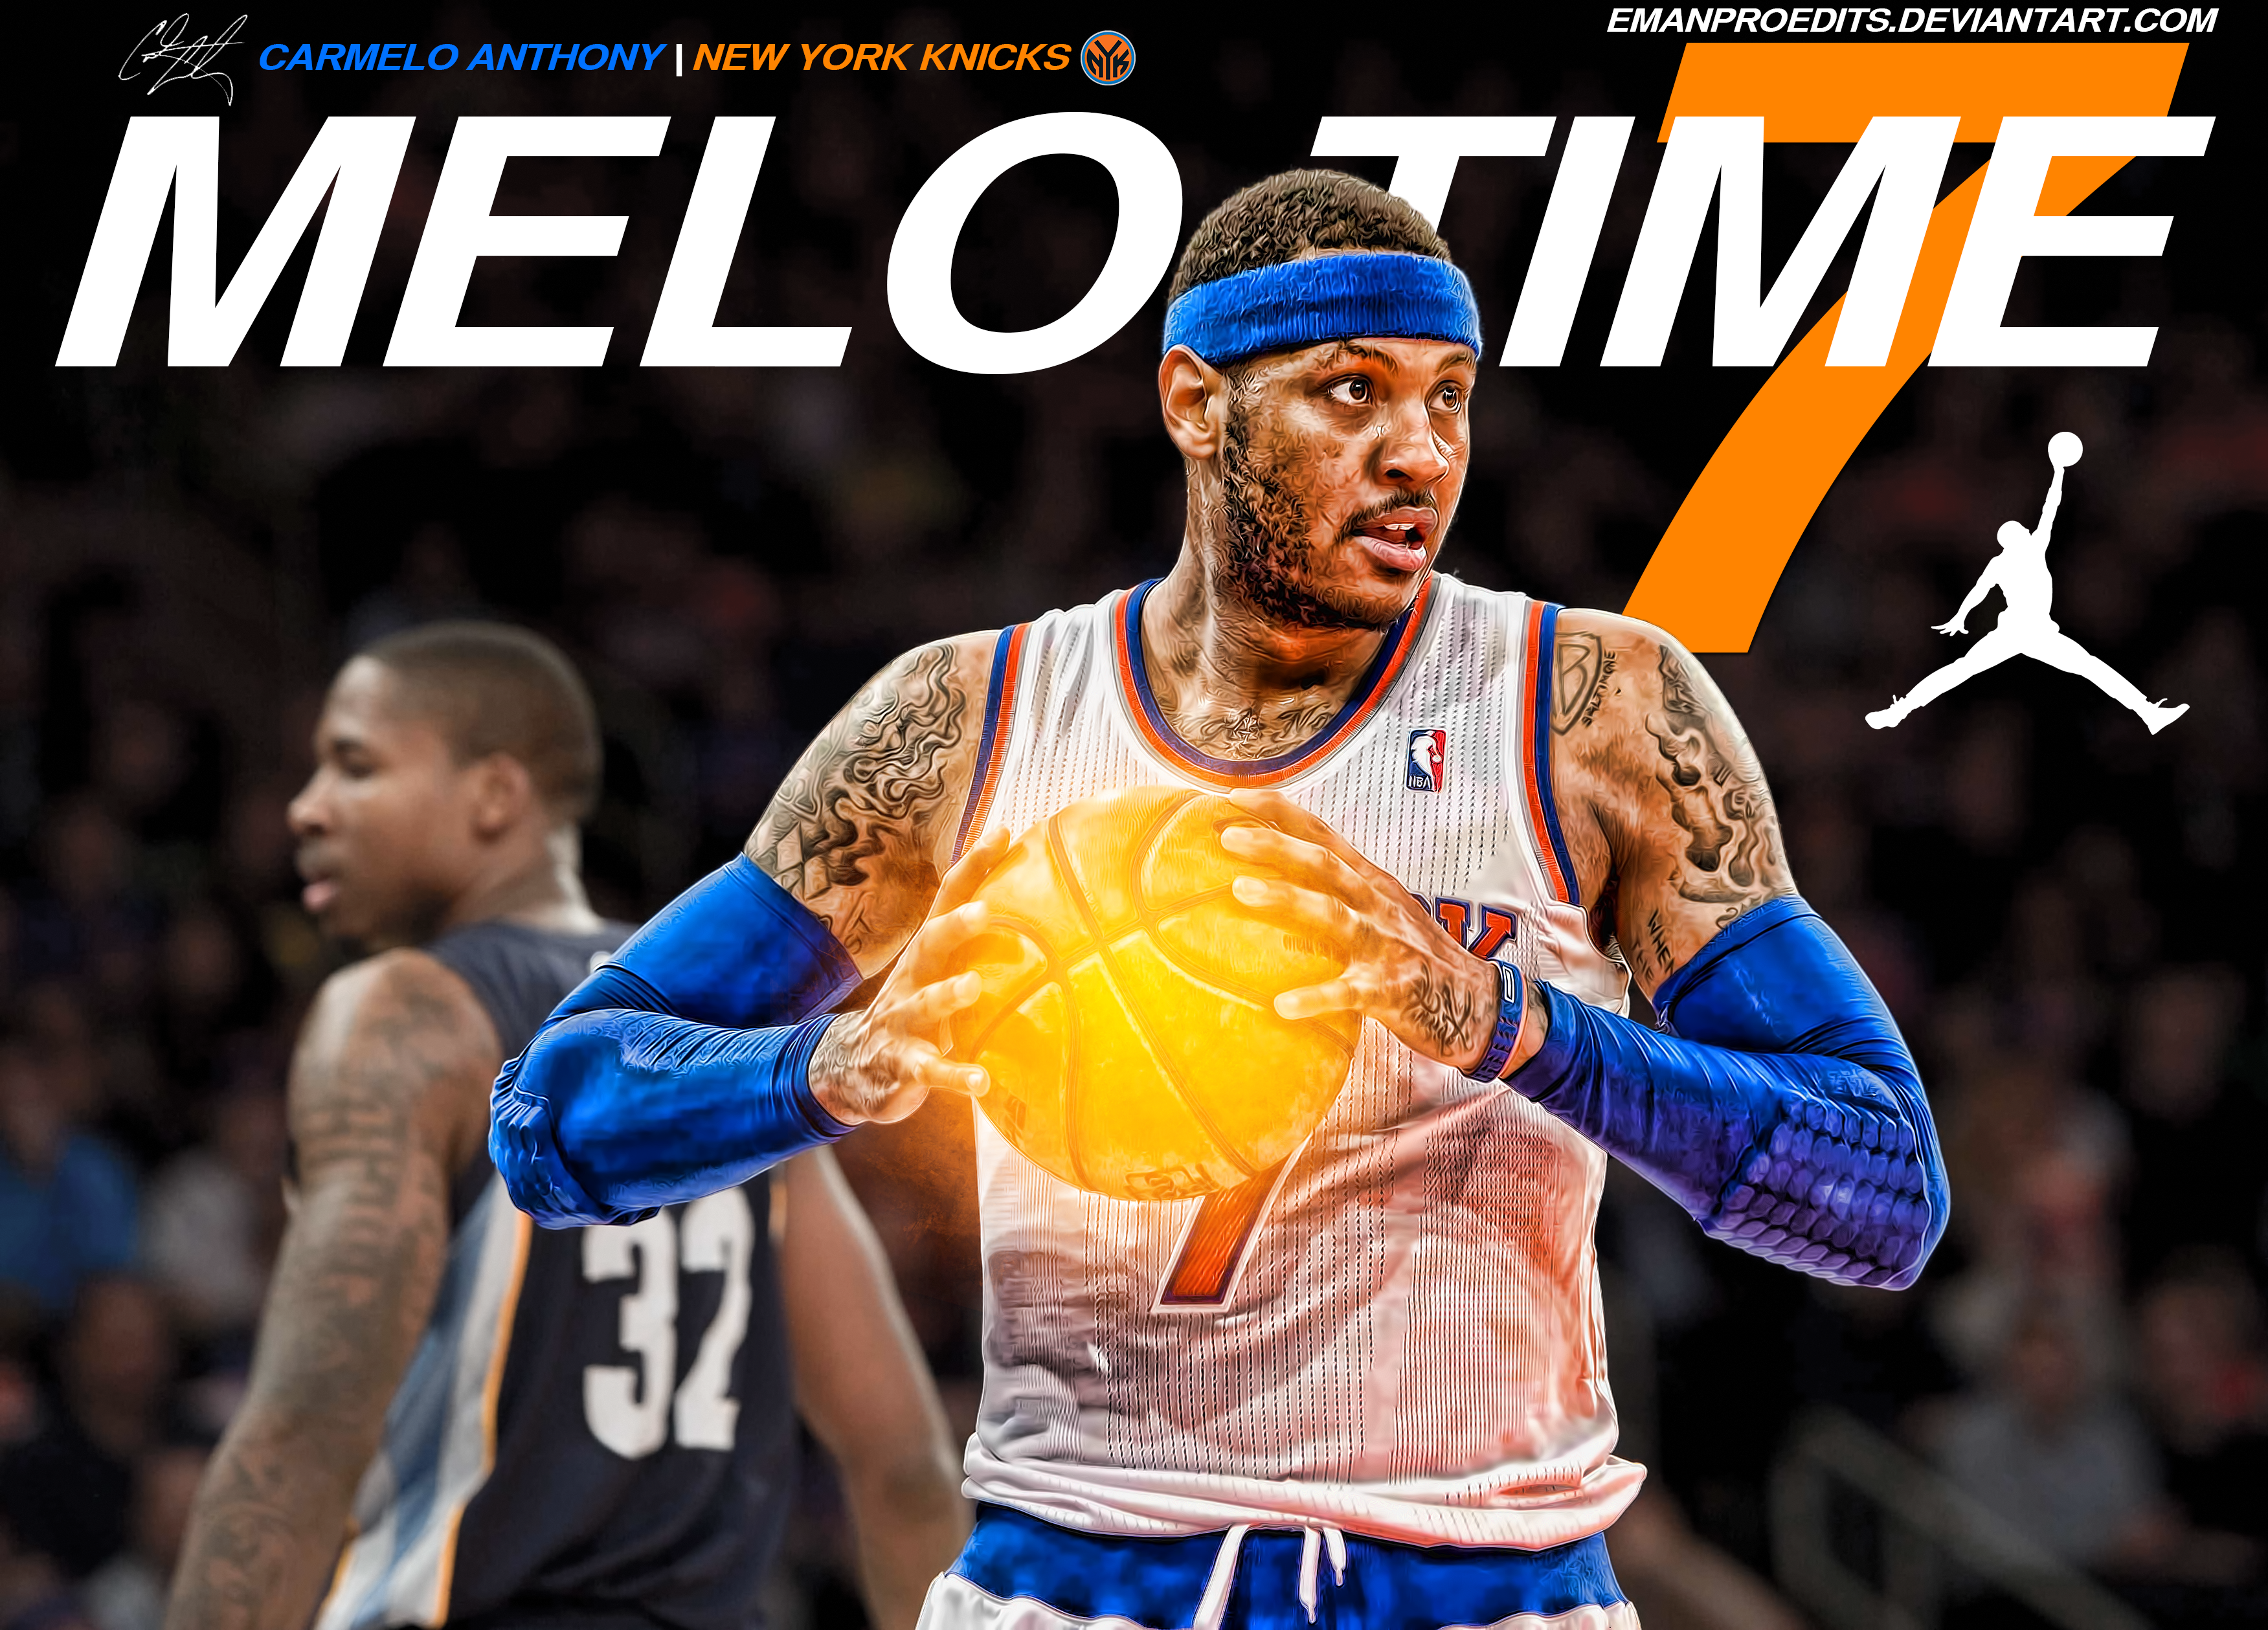 Carmelo Anthony Wallpaper by emanproedits 3503x2518